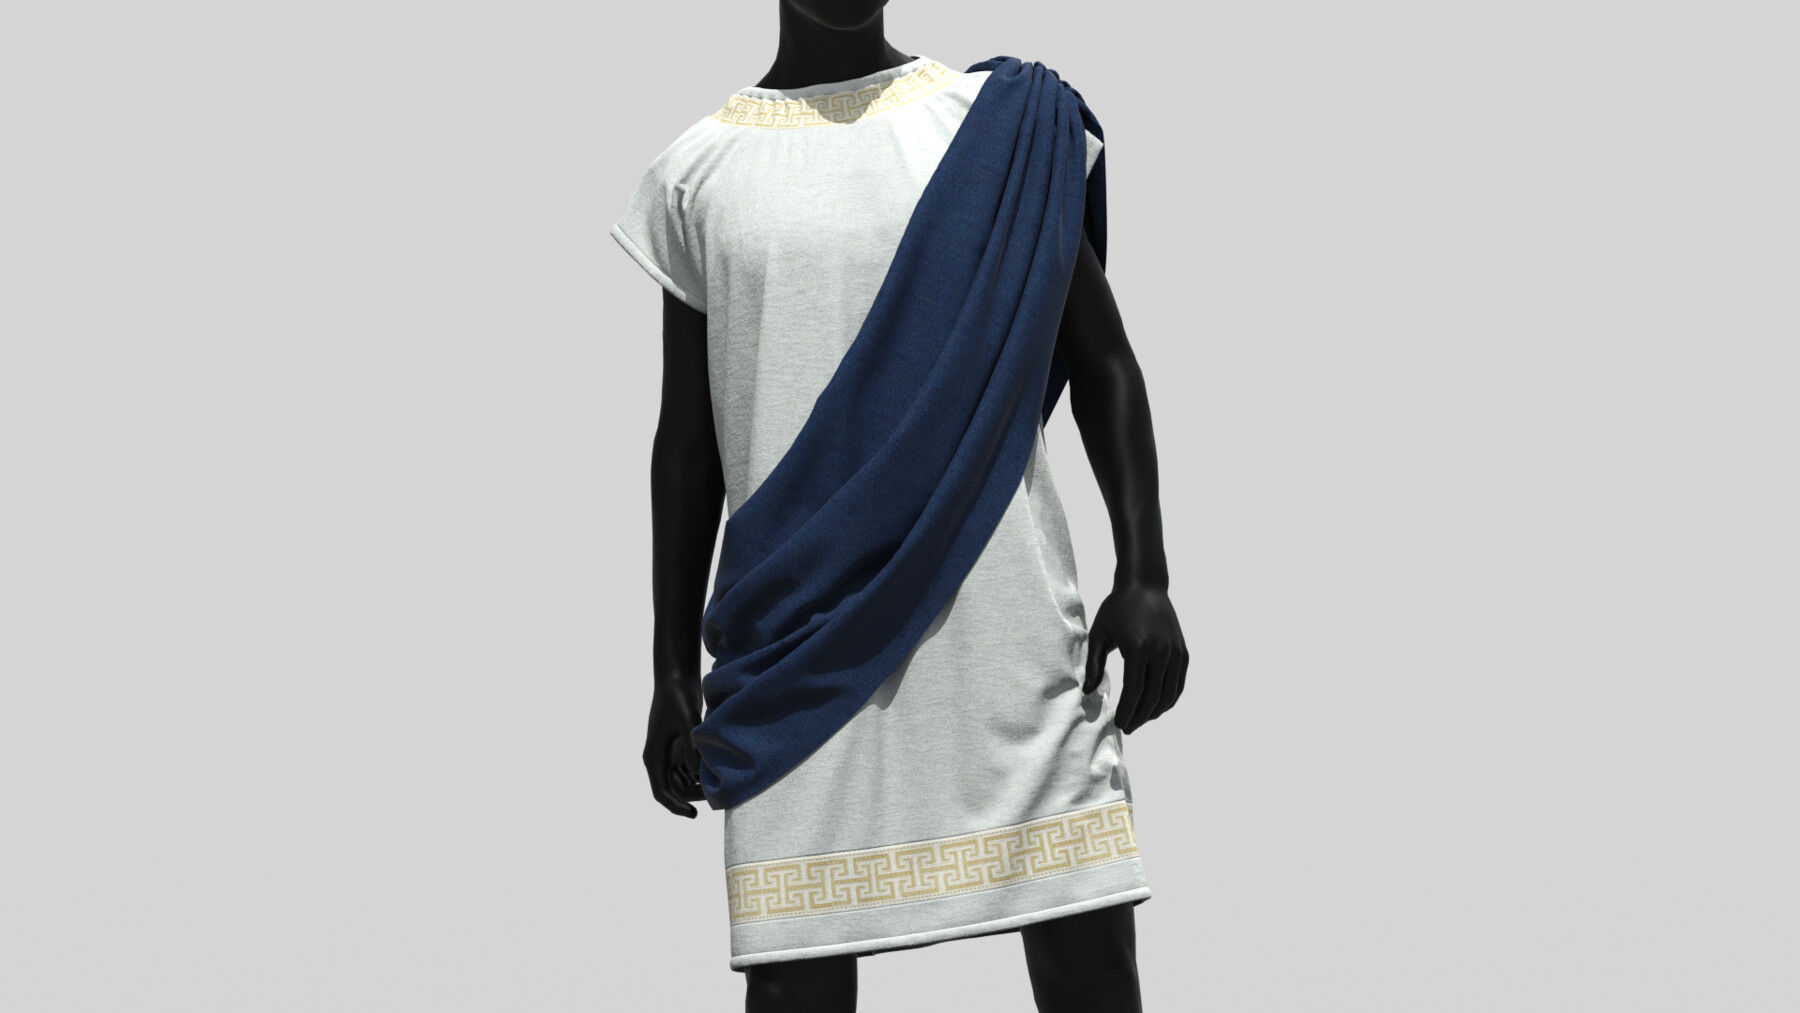 ArtStation - Realistic 3D model of Roman Outfits | Game Assets